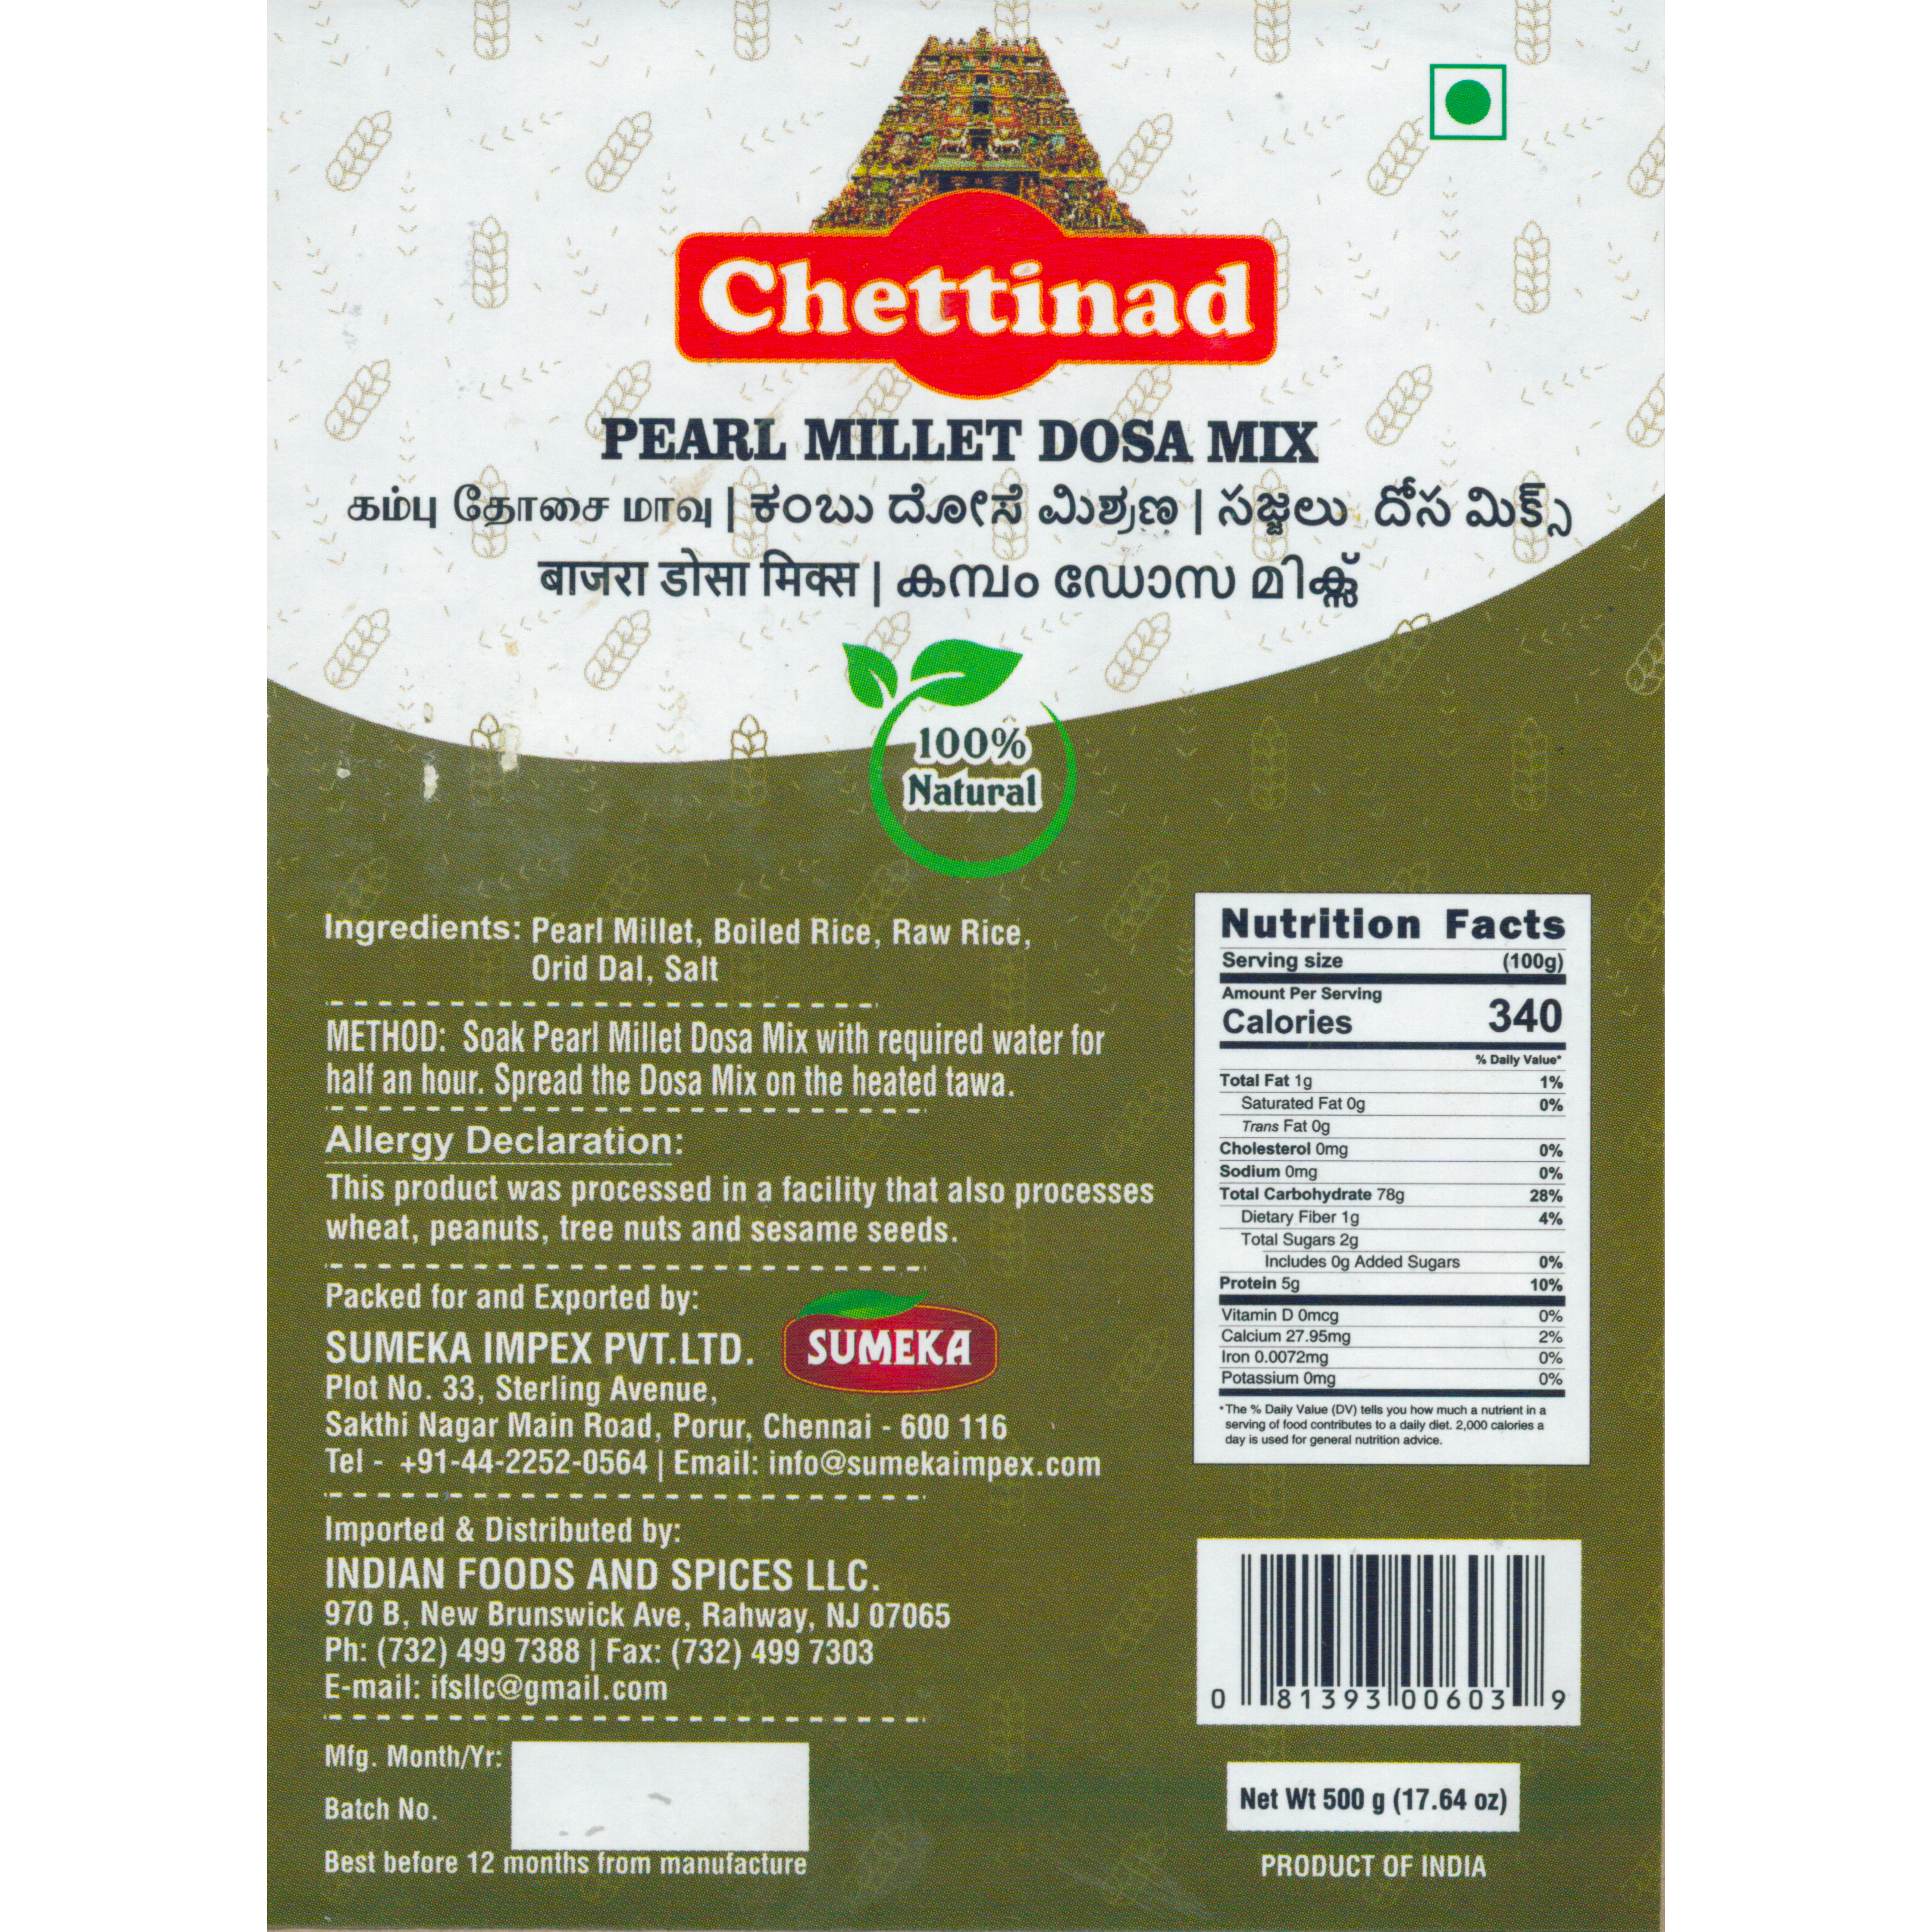 Pack of 4 - Chettinad Pearl Millet Dosa Mix - 500 Gm (1.1 Lb)